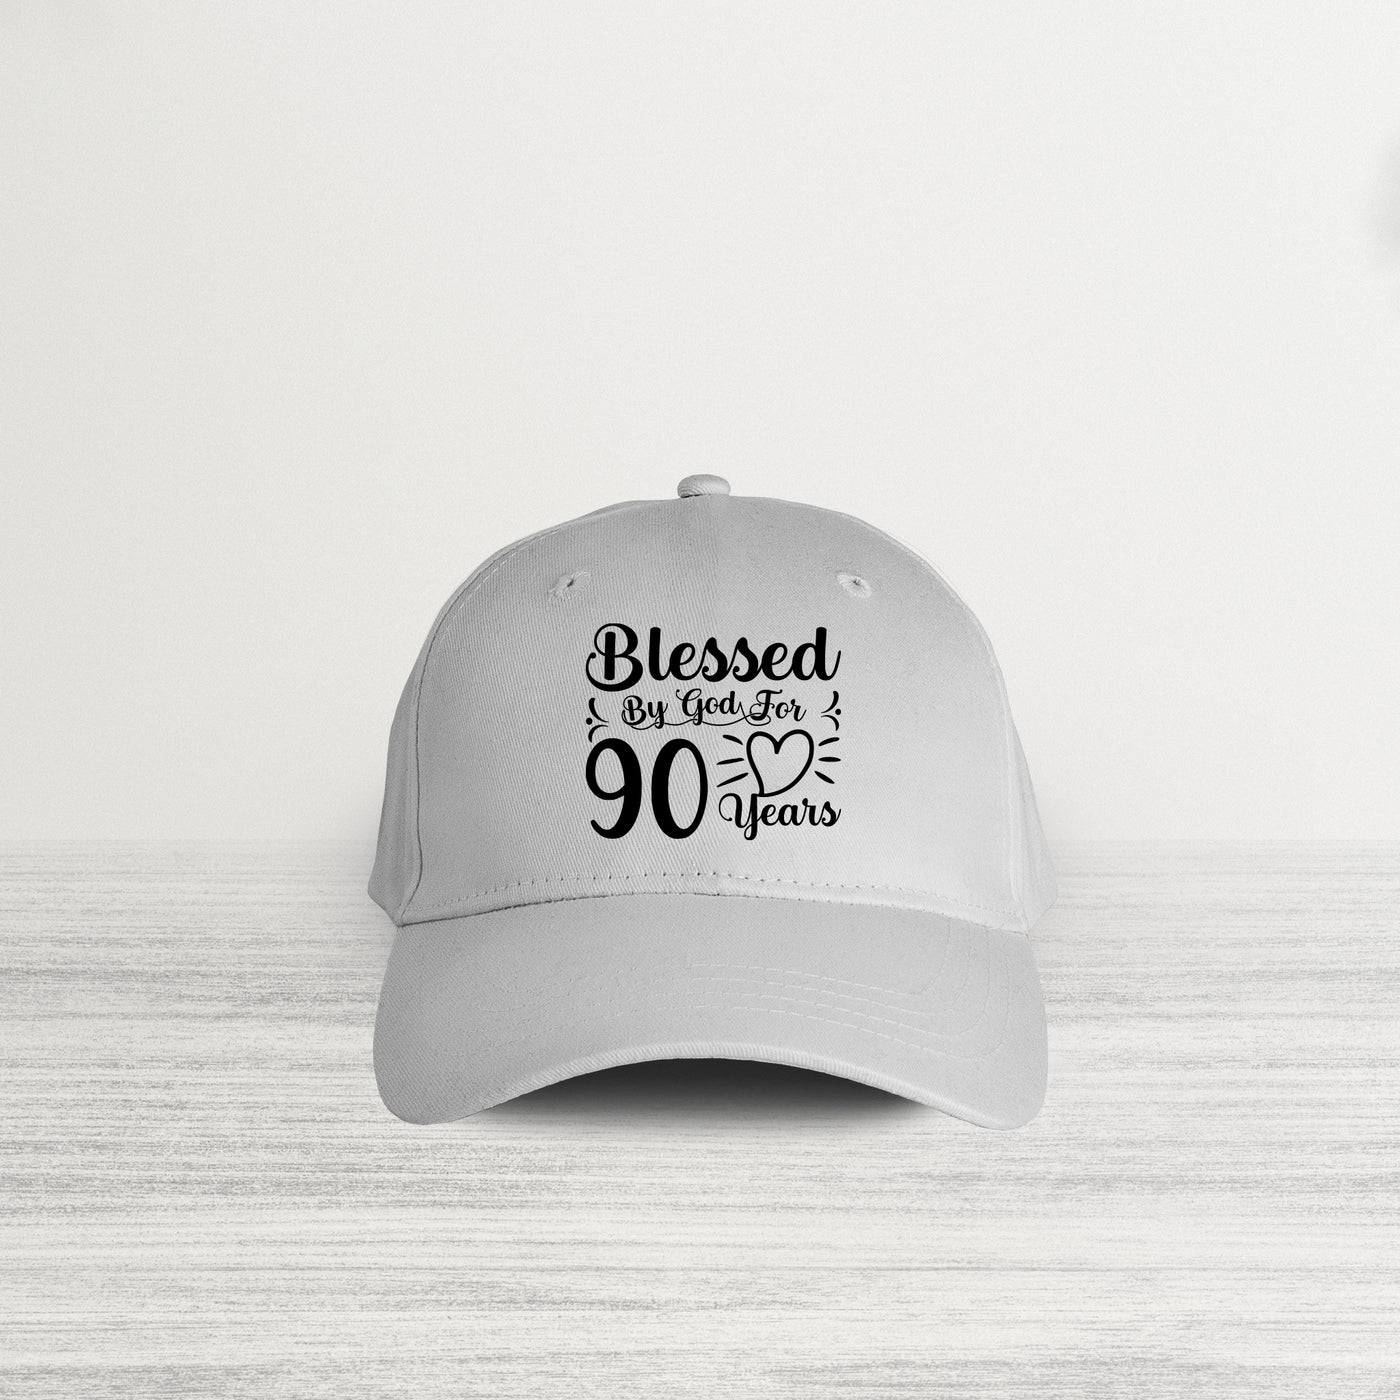 Blessed 90 Years HAT